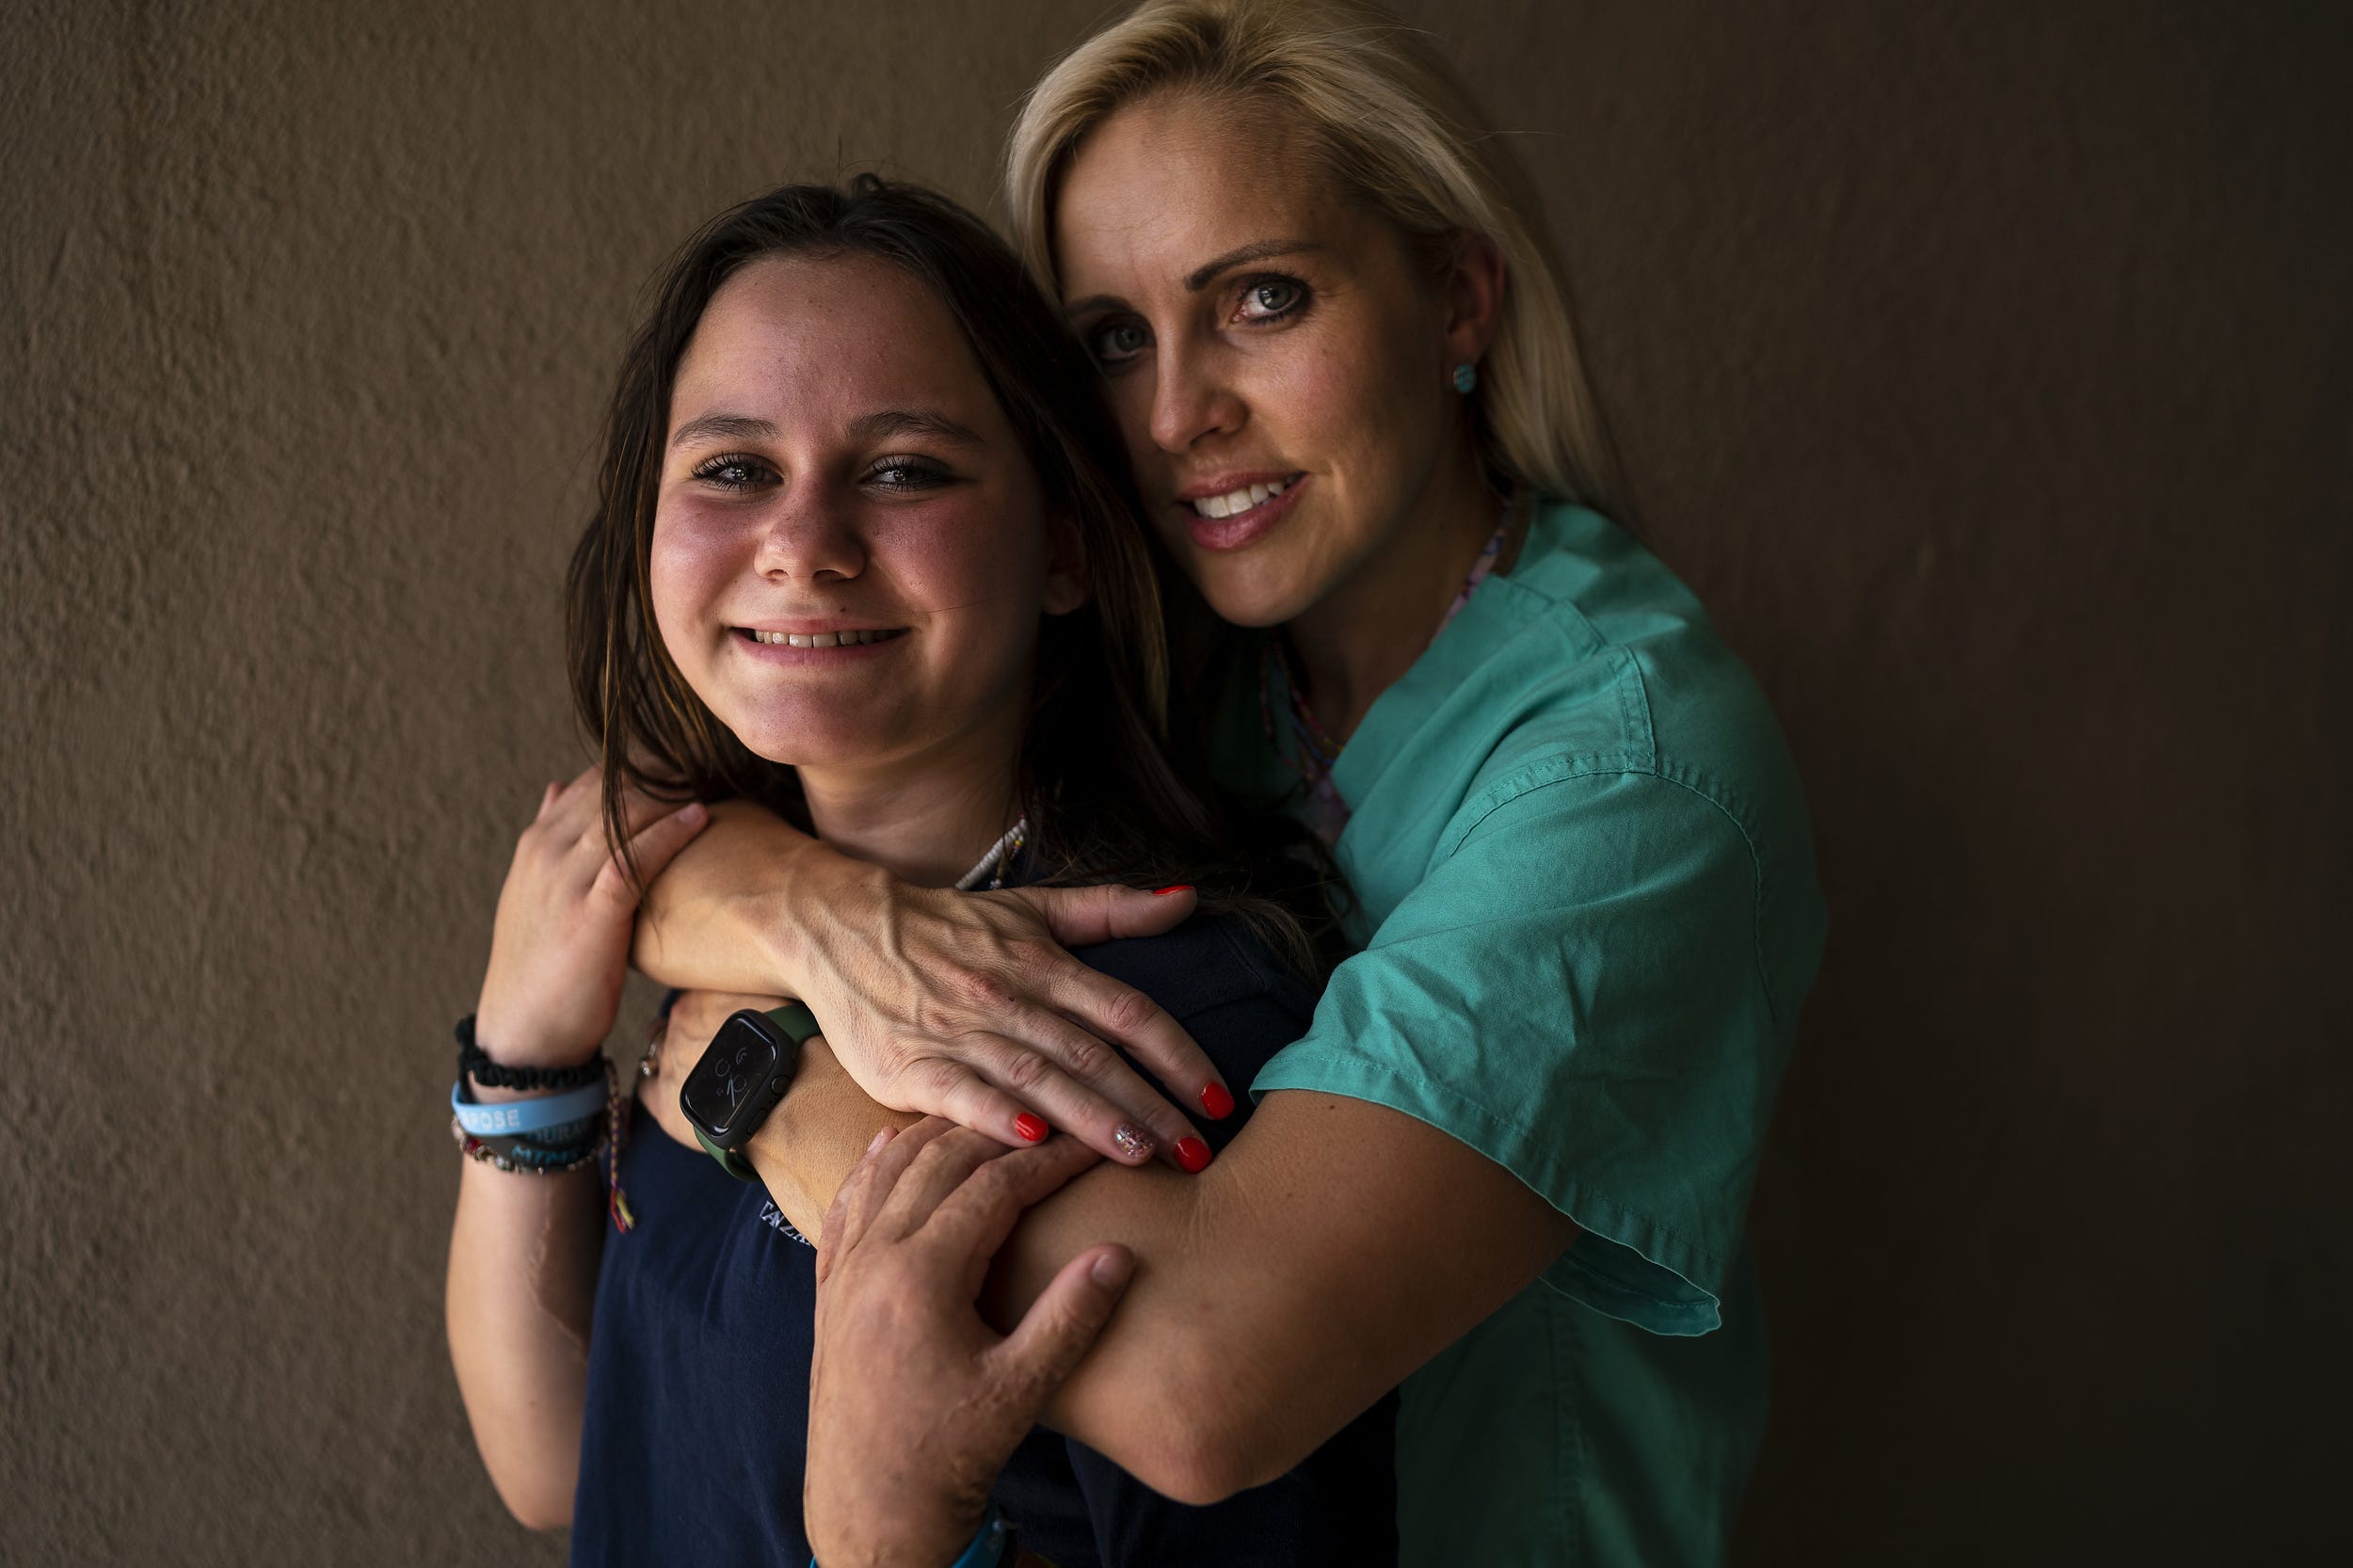 Physical therapist Danika Hines embraces Isabella McCune, 12, at Valleywise Health Medical Center on July 21, 2022, in Phoenix. McCune was burned on over 65% of her body and spent nine months in the hospital. Hines served as her physical therapist for her entire stay.